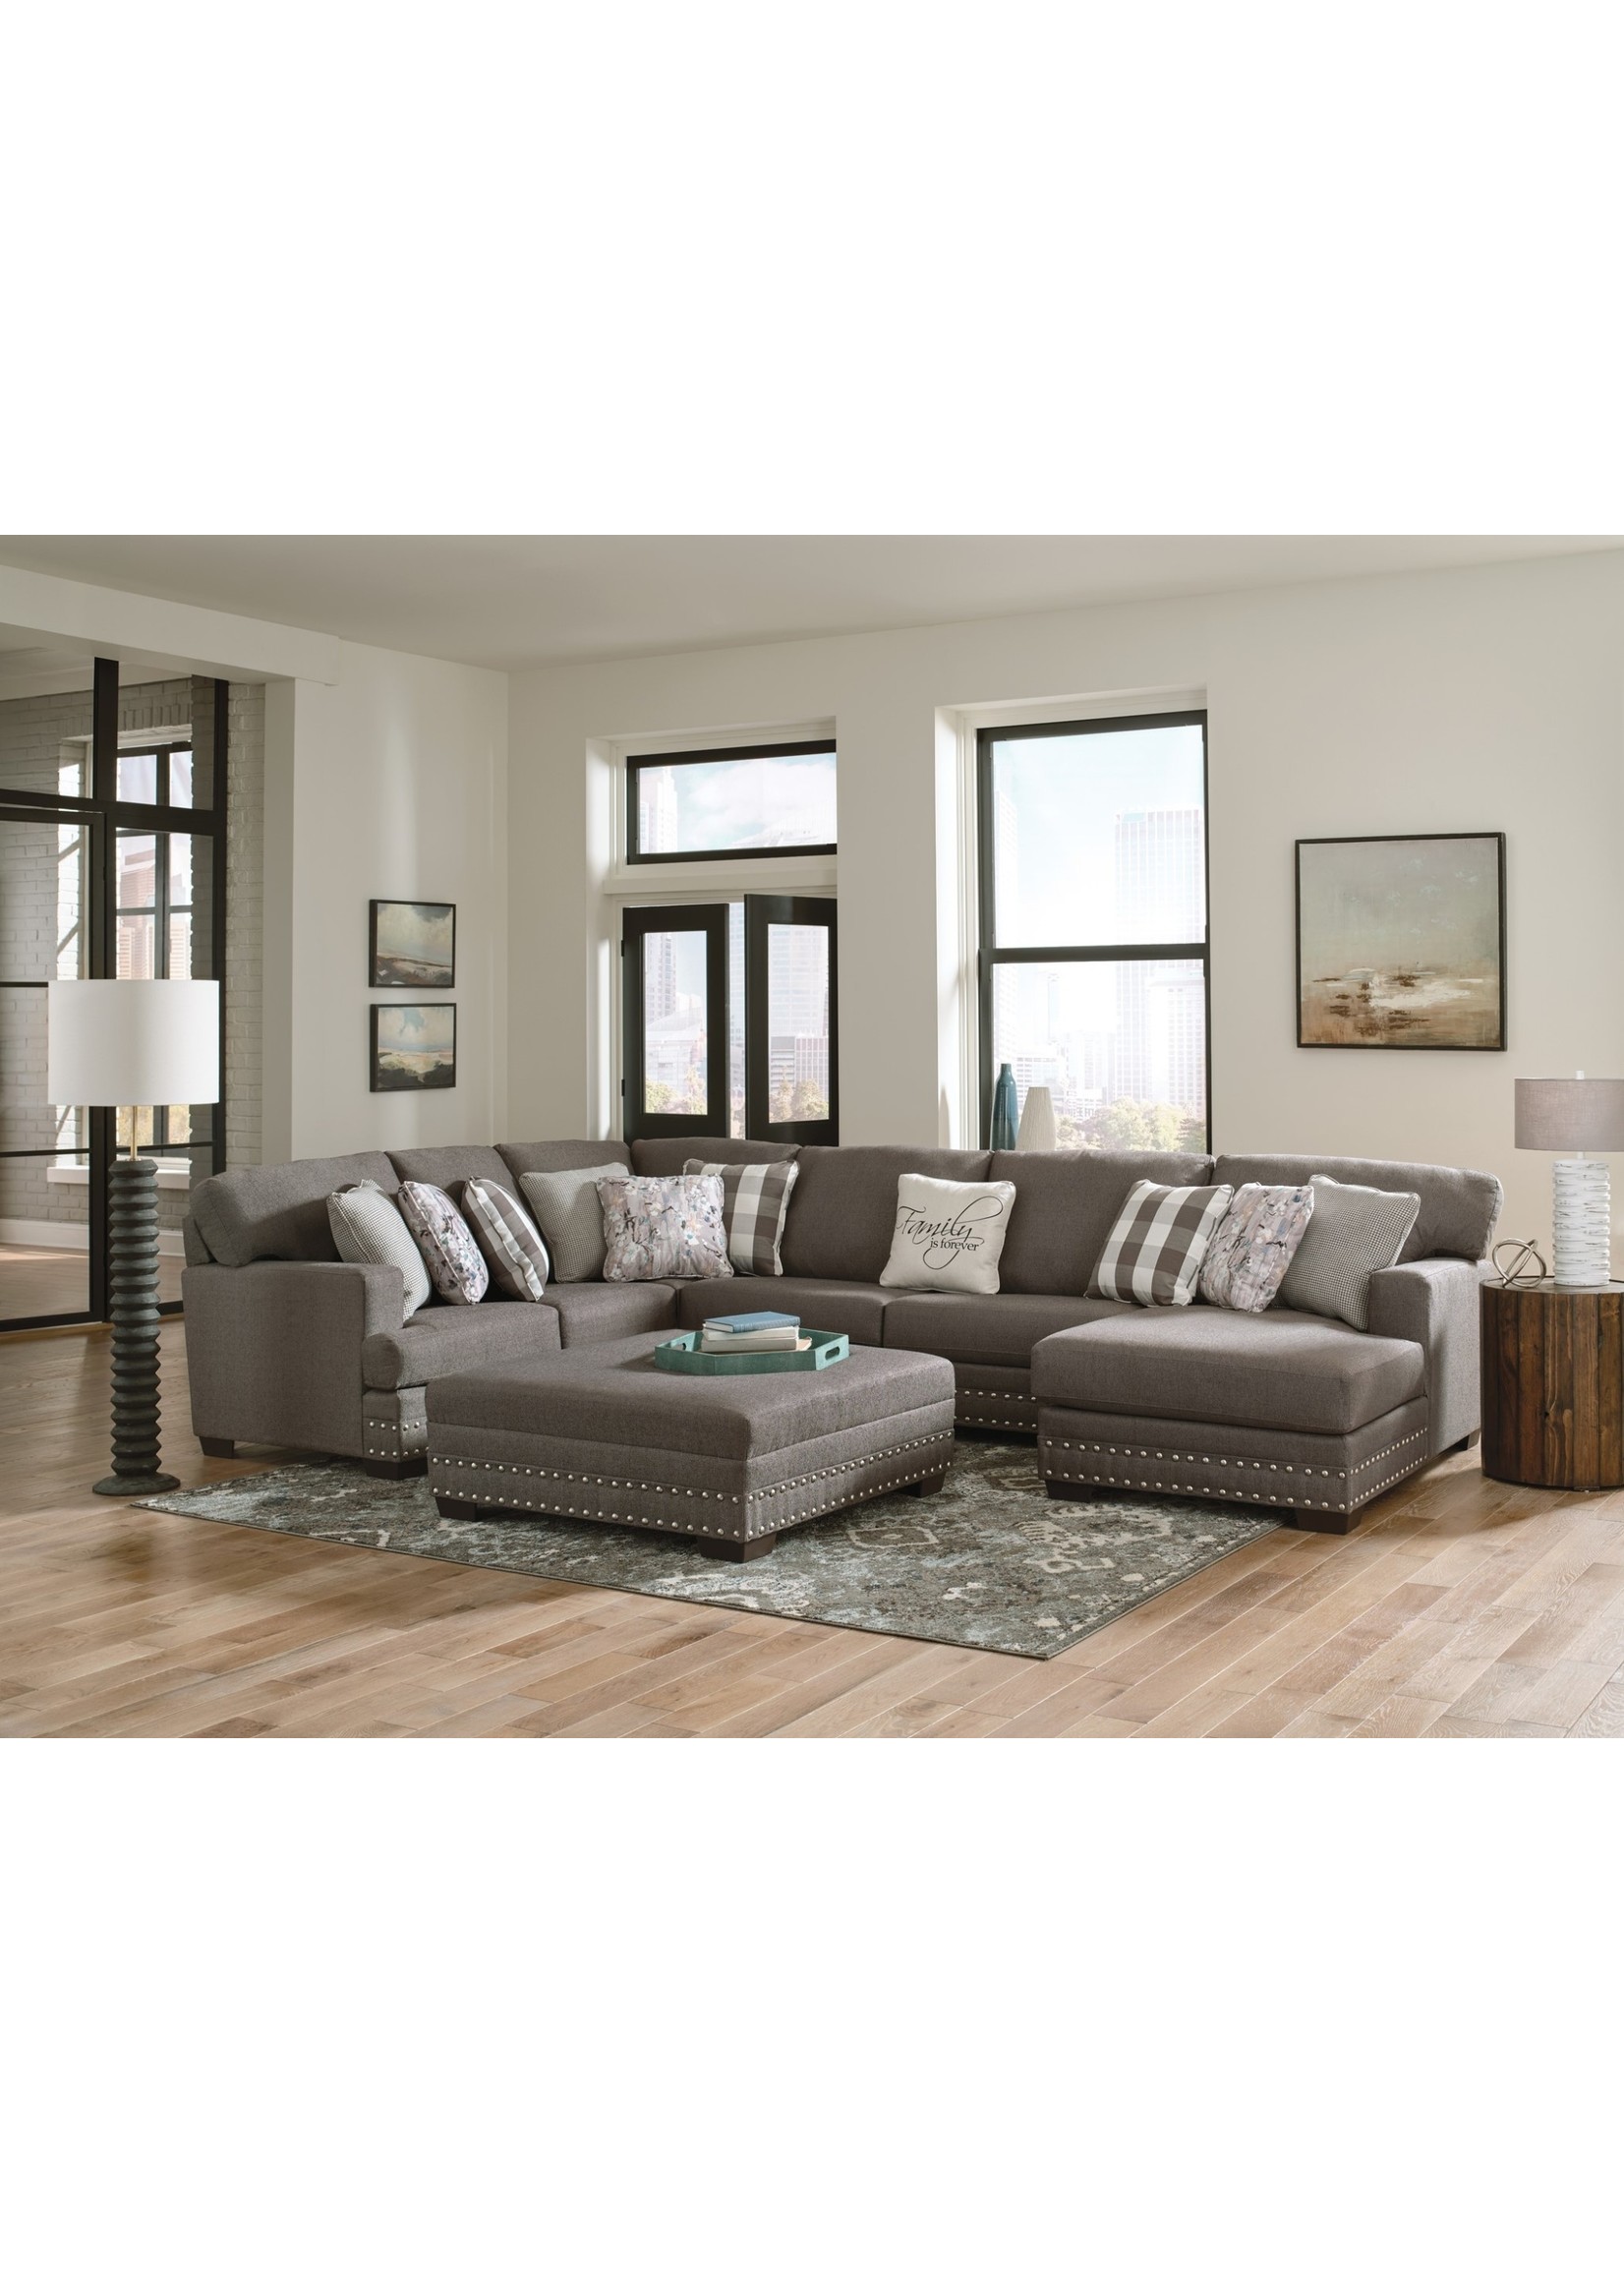 CATNAPPER 5473 CRAWFORD CHARCOAL SECTIONAL